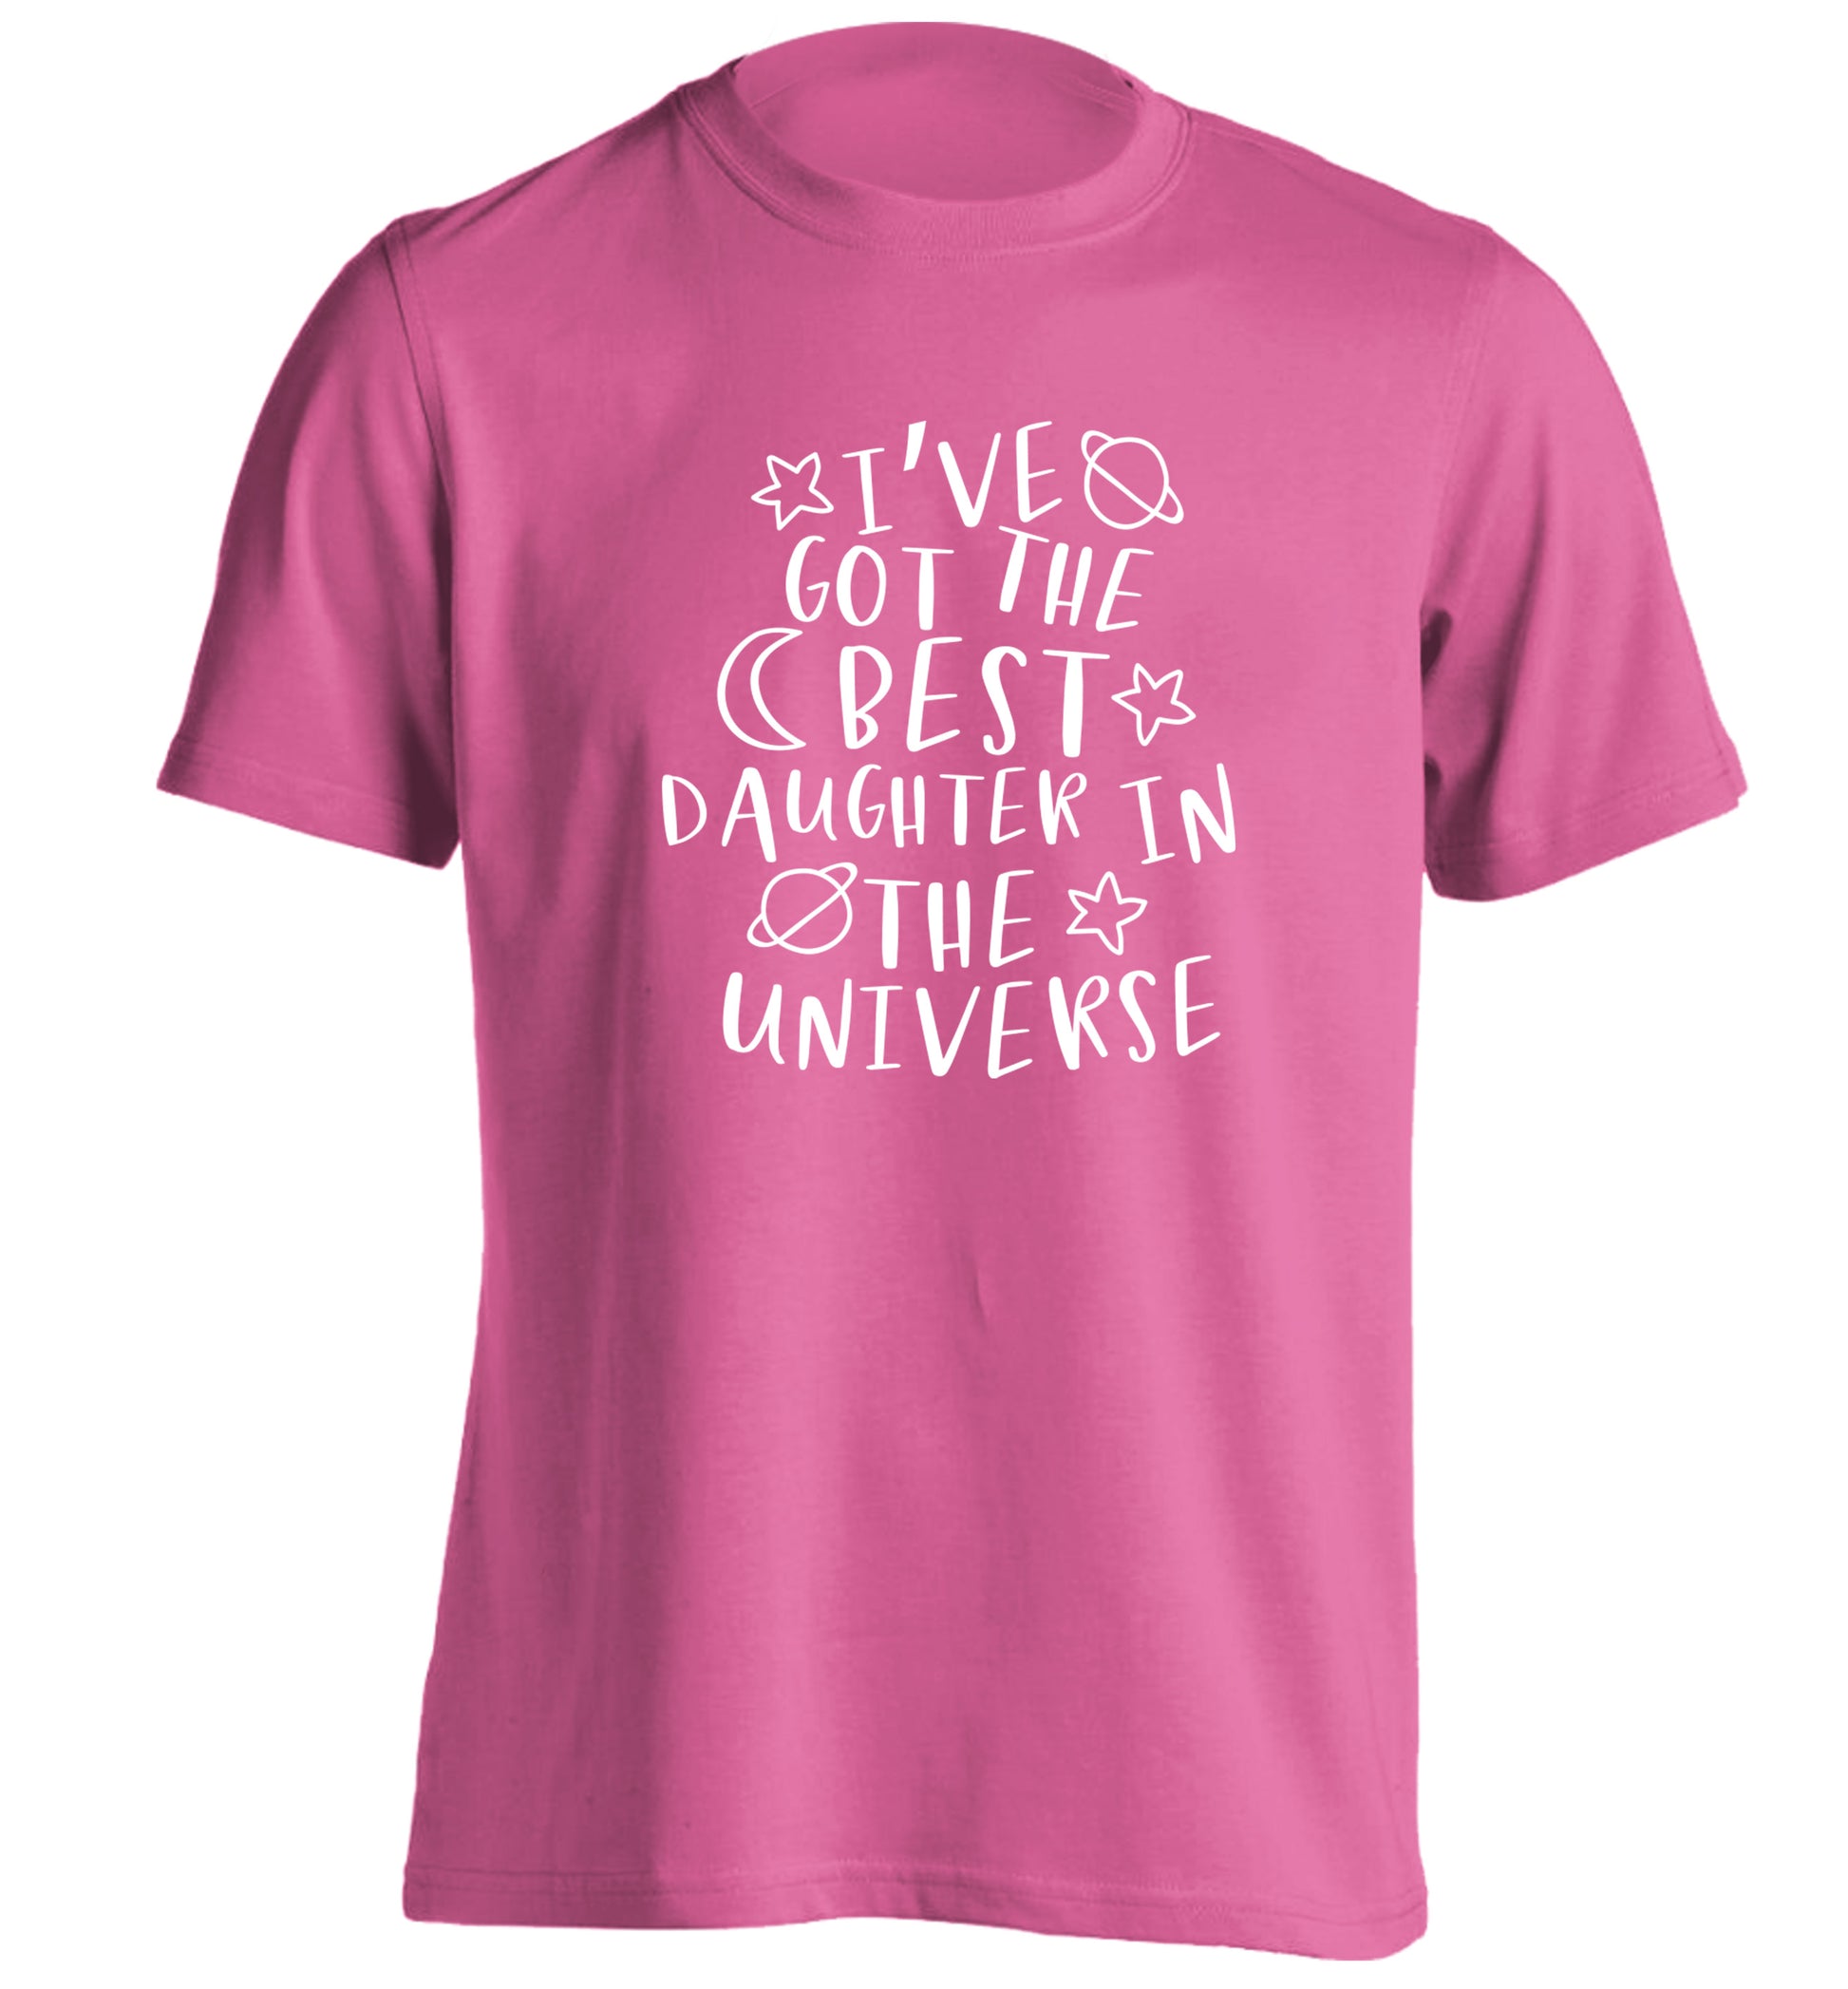 I've got the best daughter in the universe adults unisex pink Tshirt 2XL